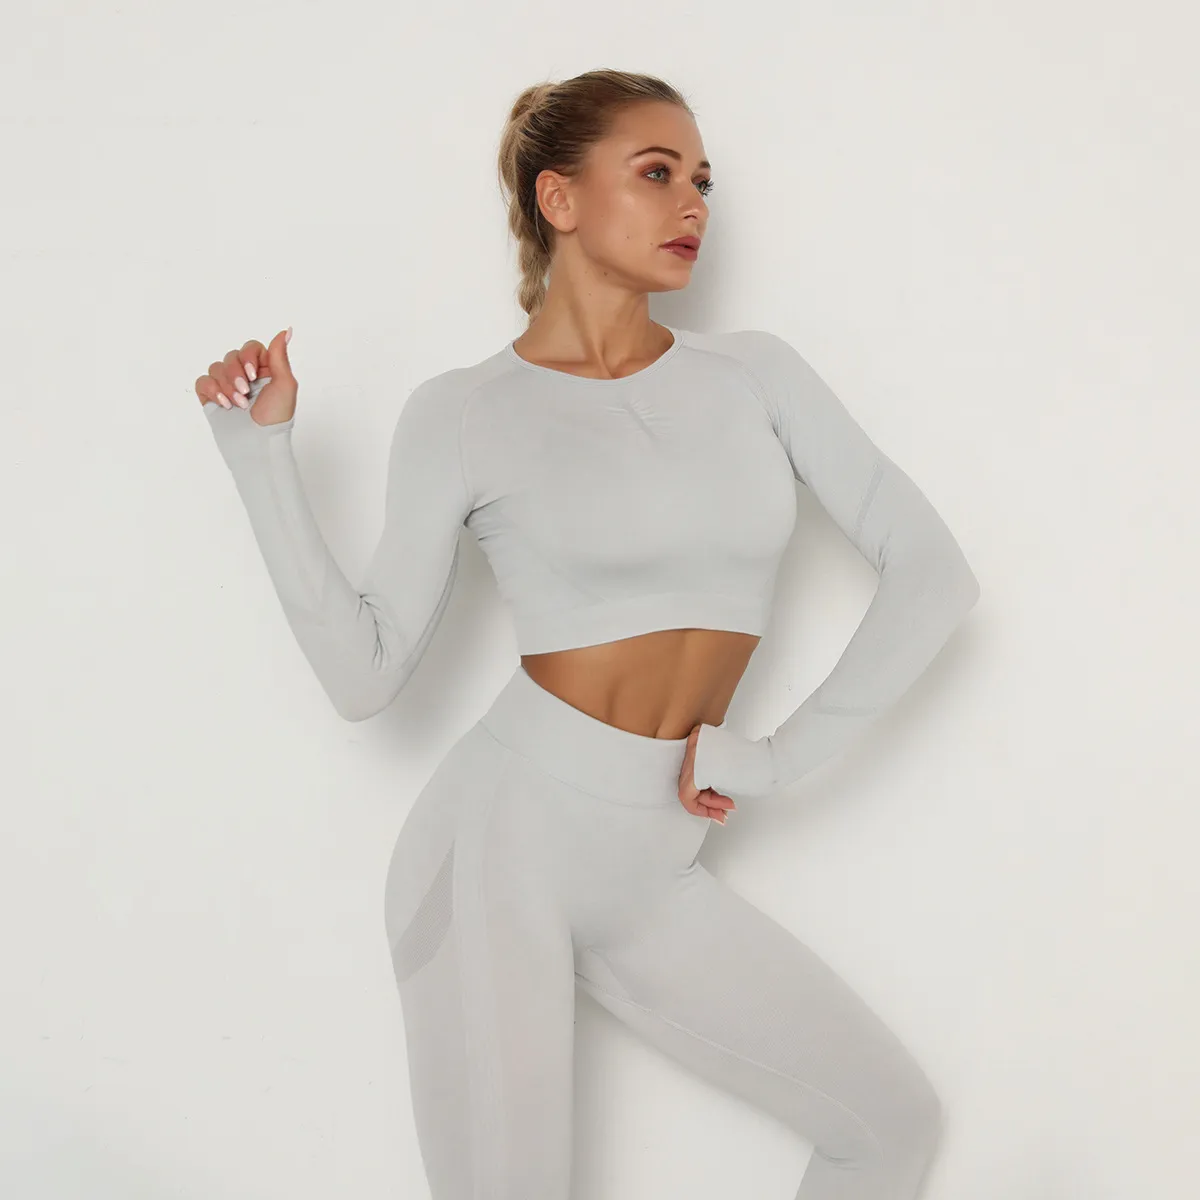 High Elasticity Long Sleeve Yoga Crop Top For Women Quick Drying